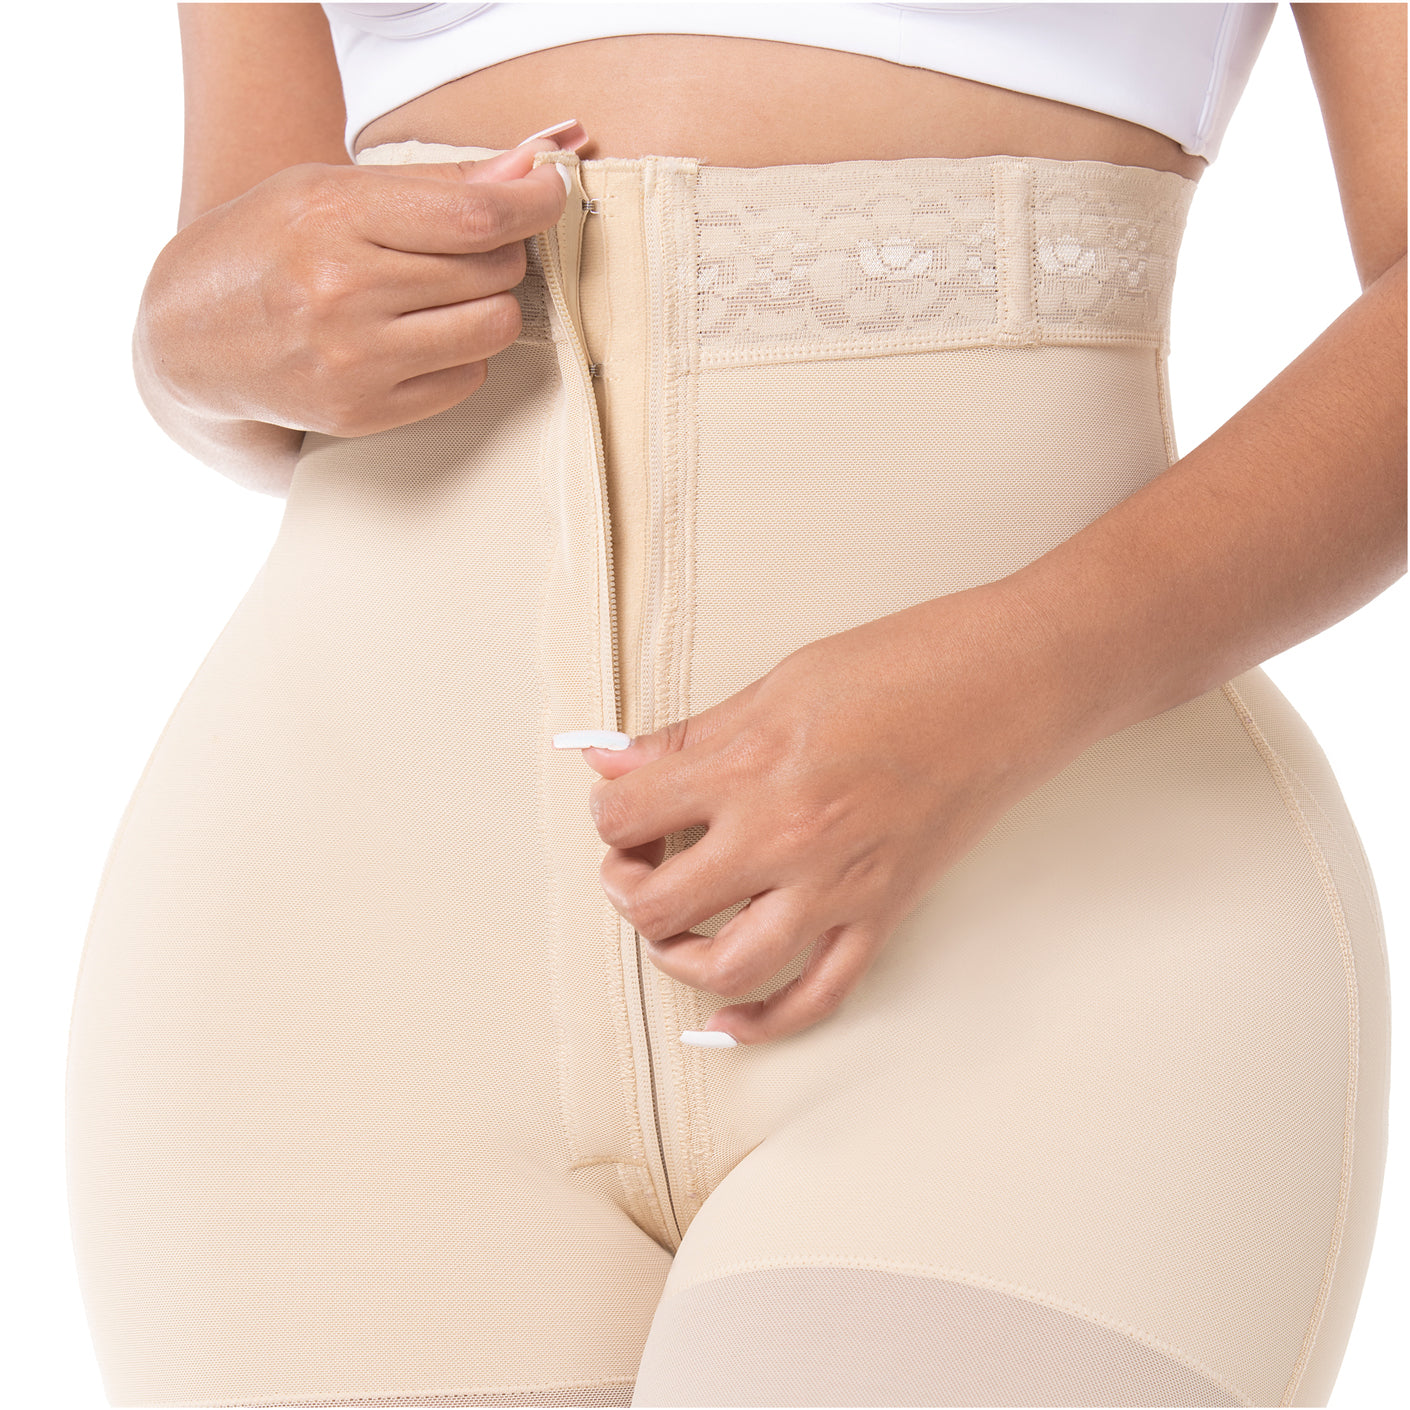 Fajas Uplady Post-Op Full Shapewear with Sleeves